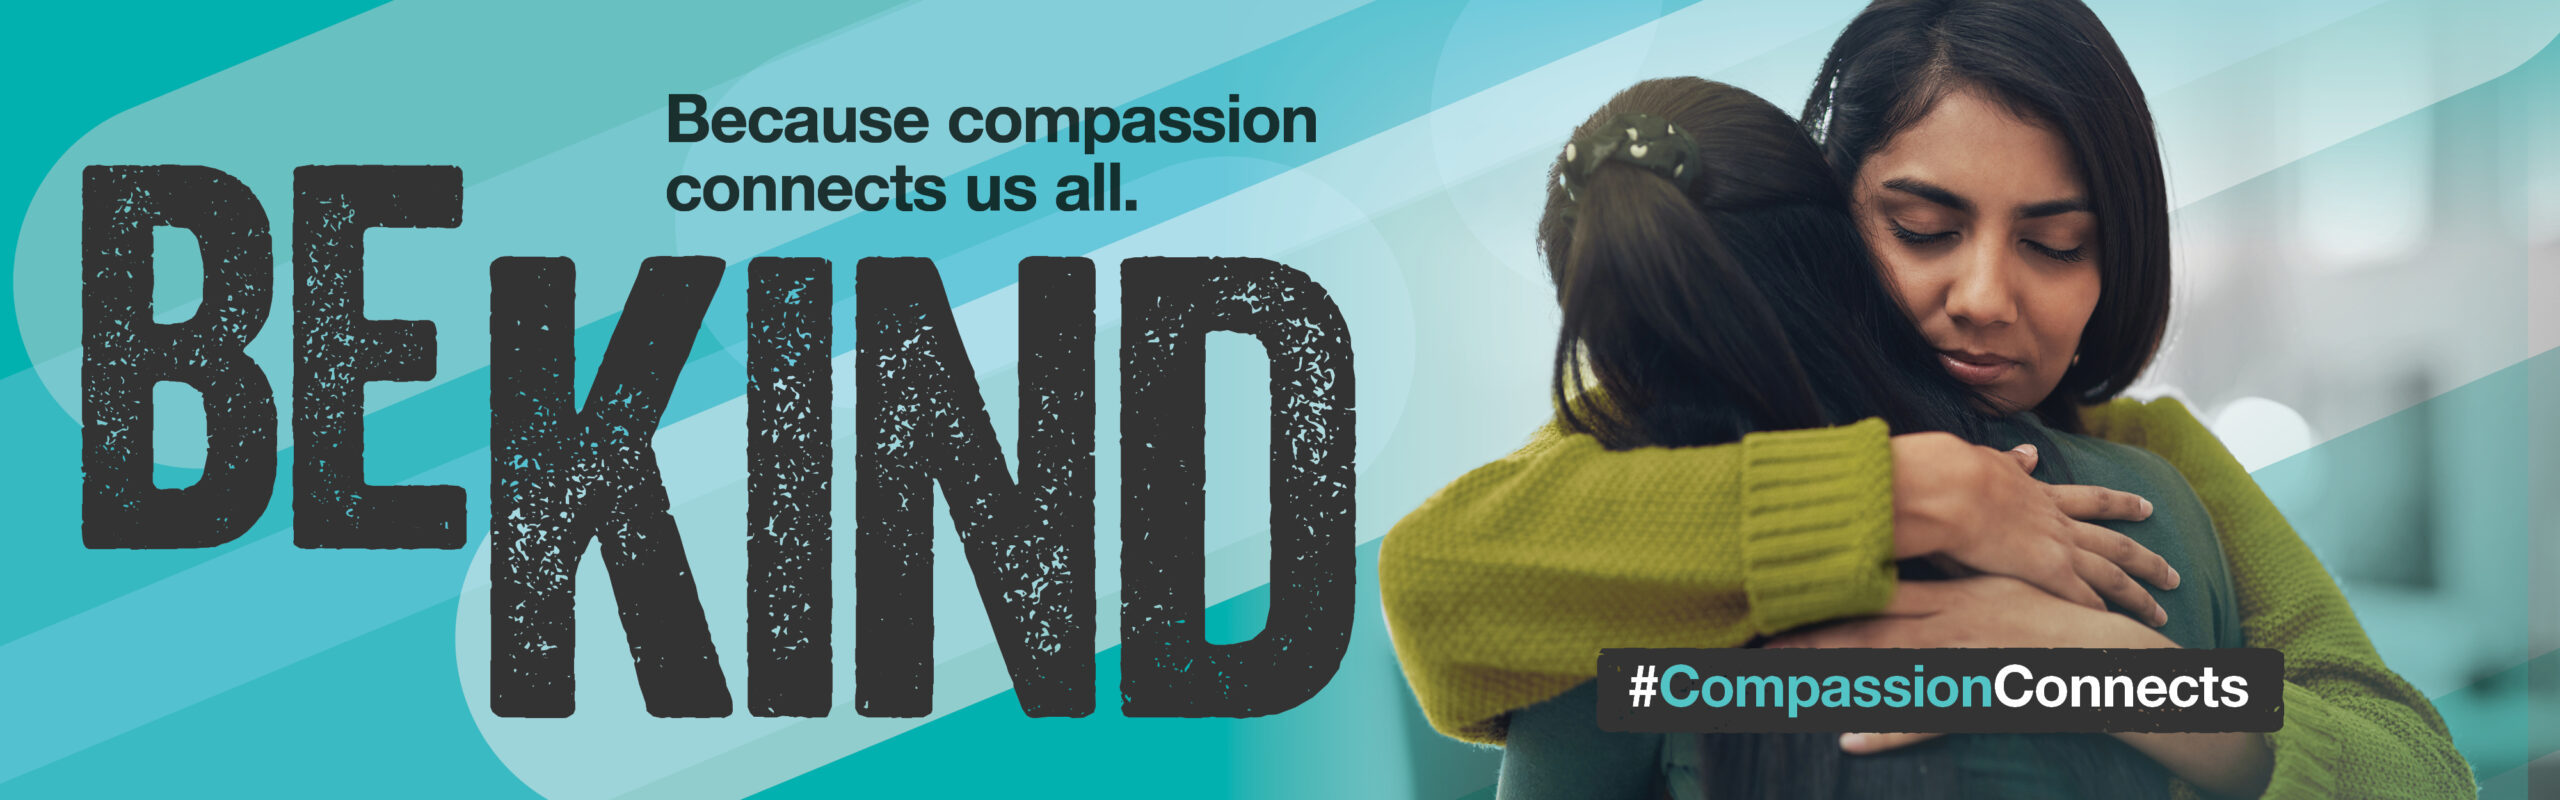 Celebrate Mental Health Week with kindness and compassion